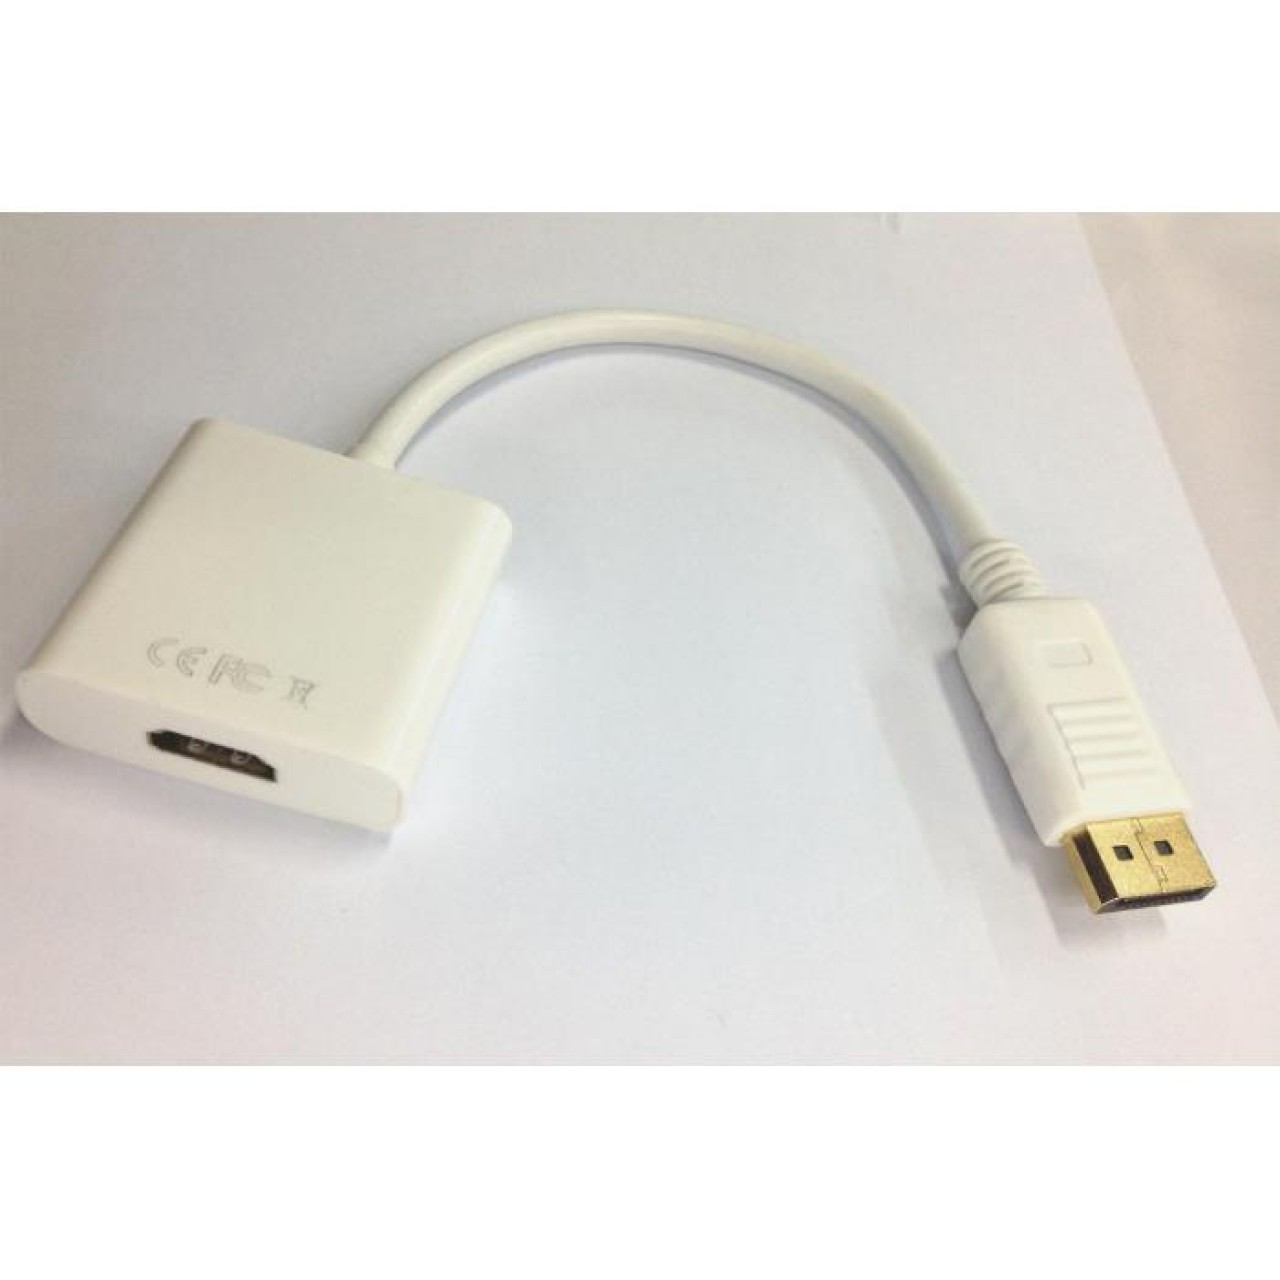 DP to HDMI Adapter Aculine AD-016